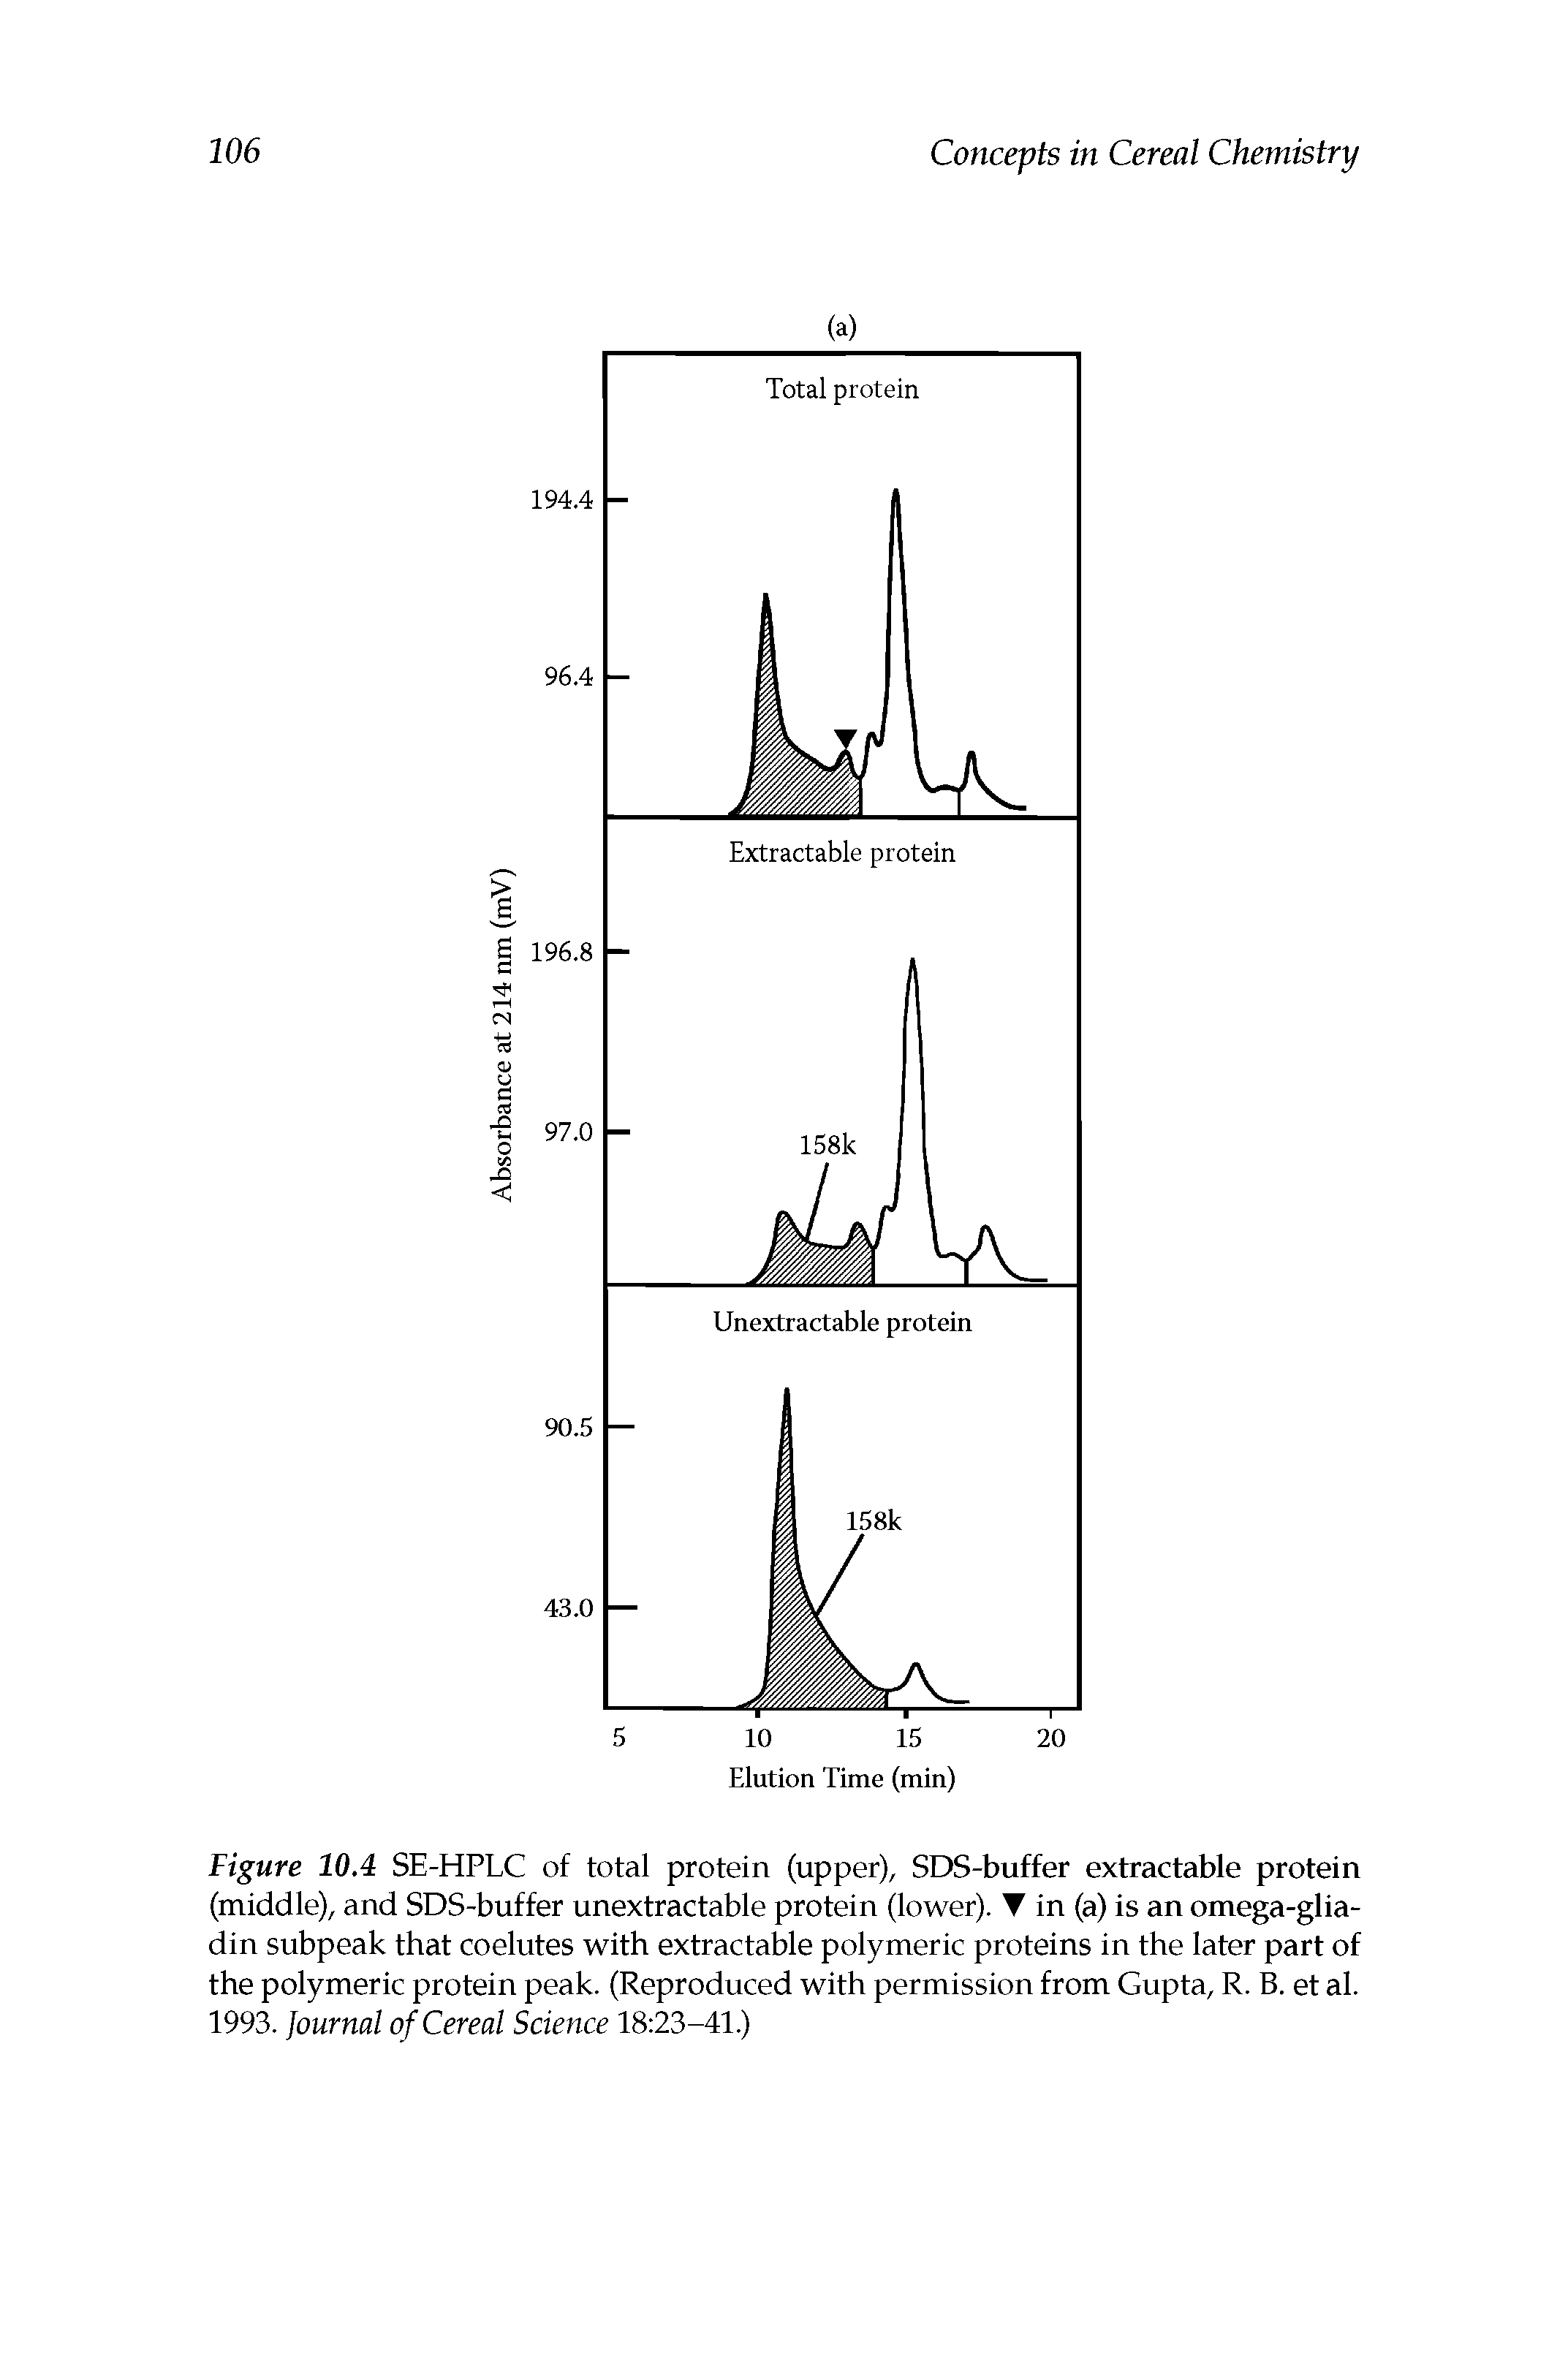 Figure IQA SE-HPLC of total protein (upper), SDS-buffer extractable protein (middle), and SDS-buffer unextractable protein (lower). T in (a) is an omega-glia-din subpeak that coelutes with extractable polymeric proteins in the later part of the polymeric protein peak. (Reproduced with permission from Gupta, R. B. et al. 1993. Journal of Cereal Science 18 23-41.)...